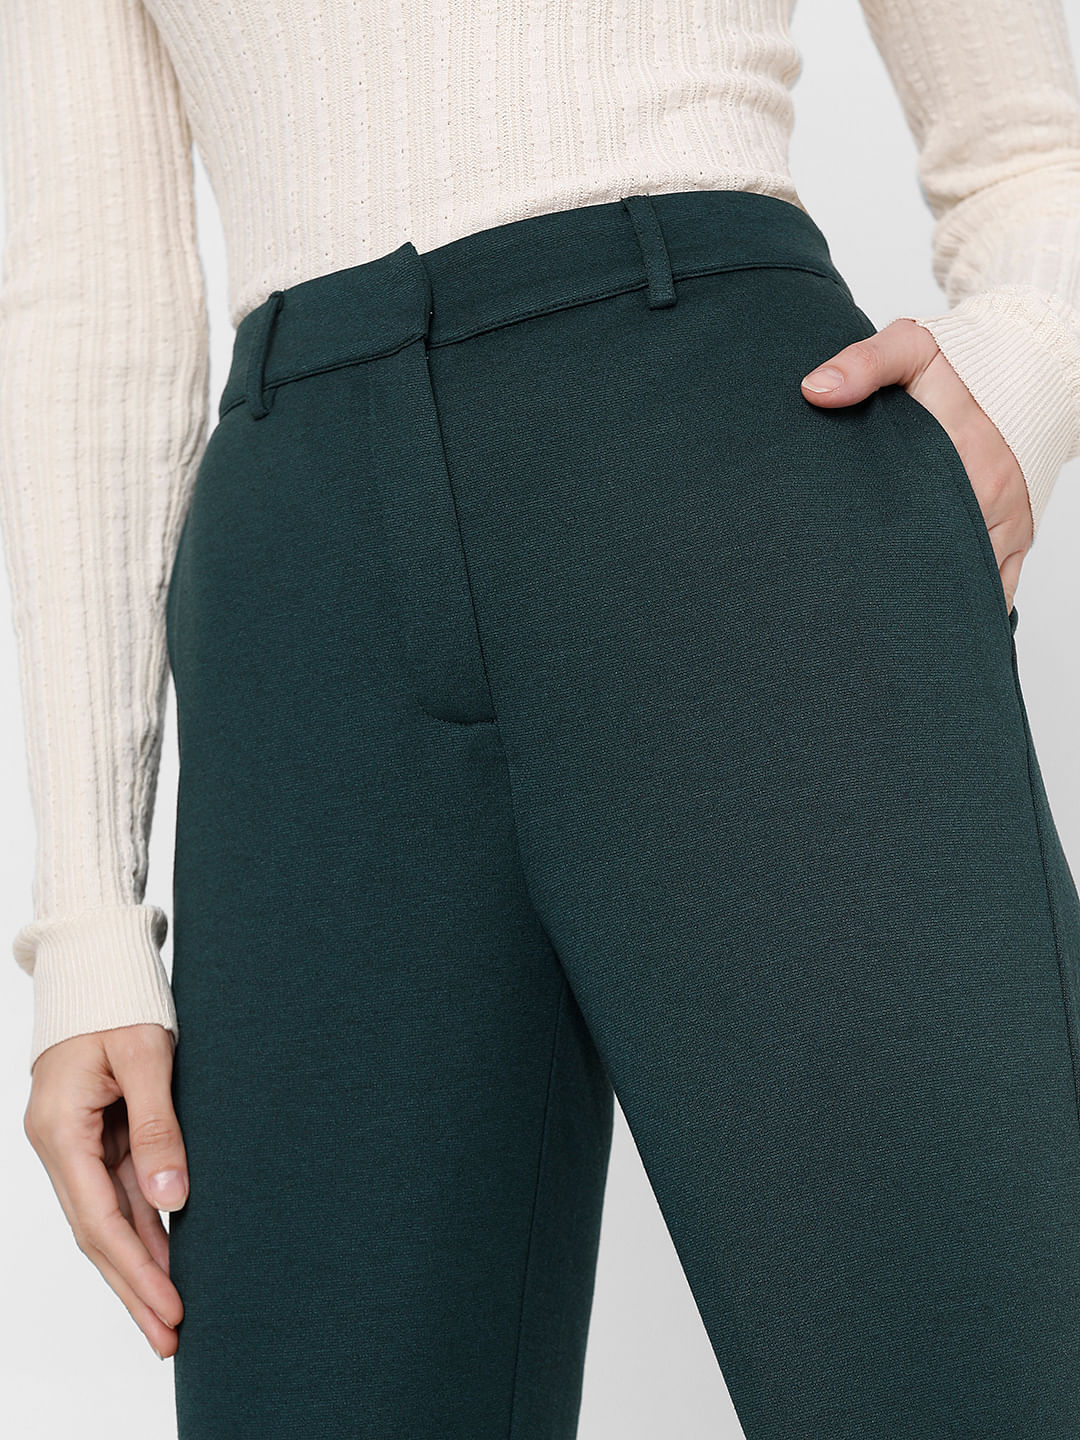 Wide tailored trousers - Dark grey/Dogtooth-patterned - Ladies | H&M